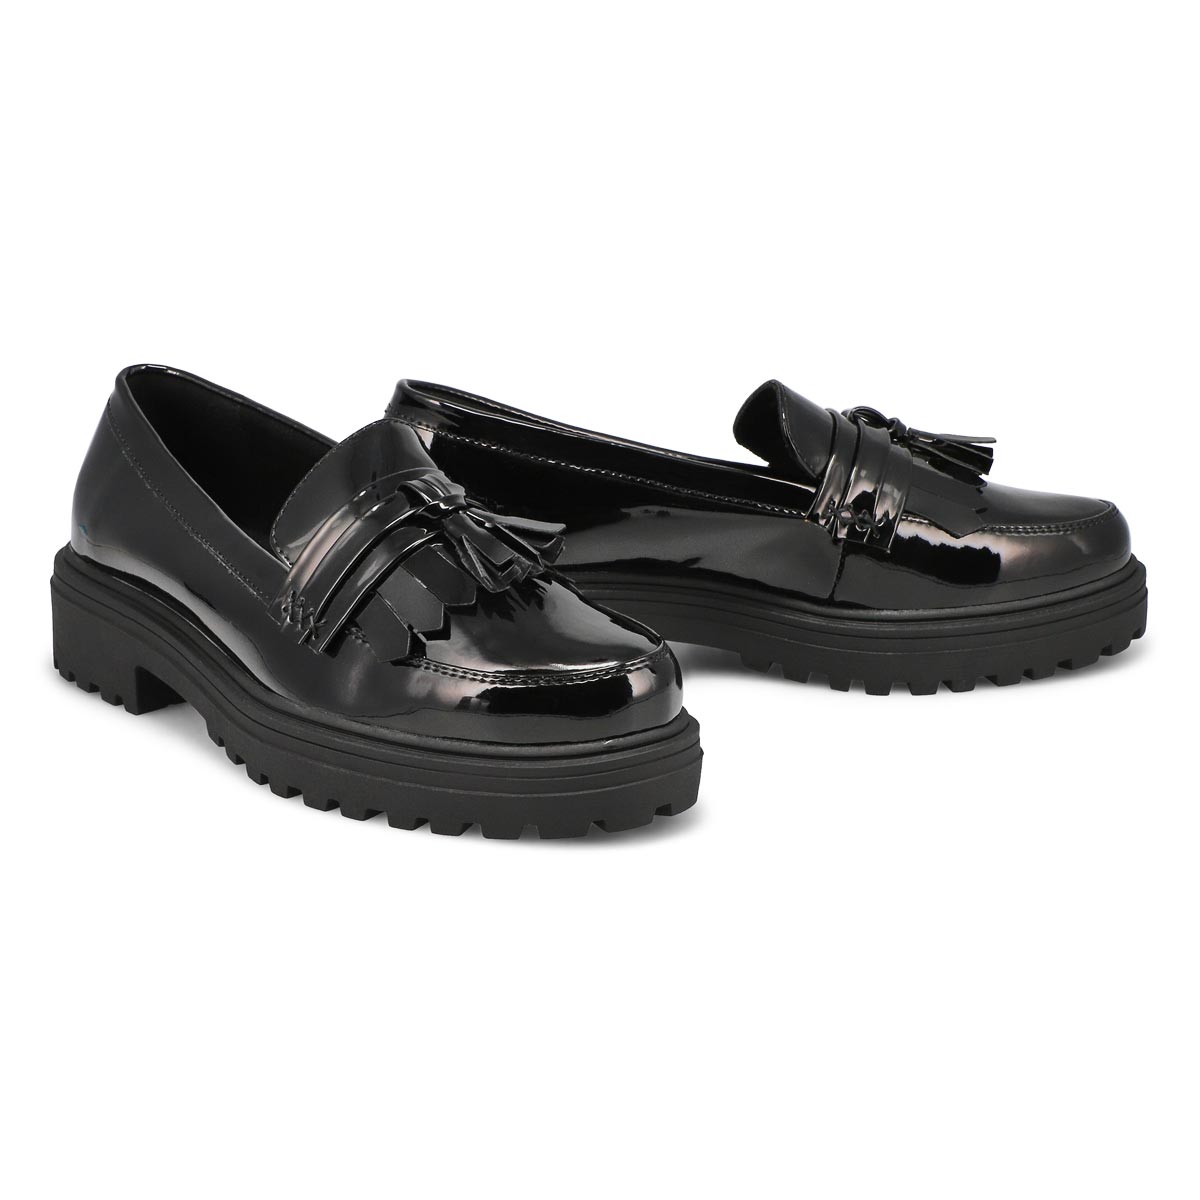 Women's Dory Casual Loafer - Black